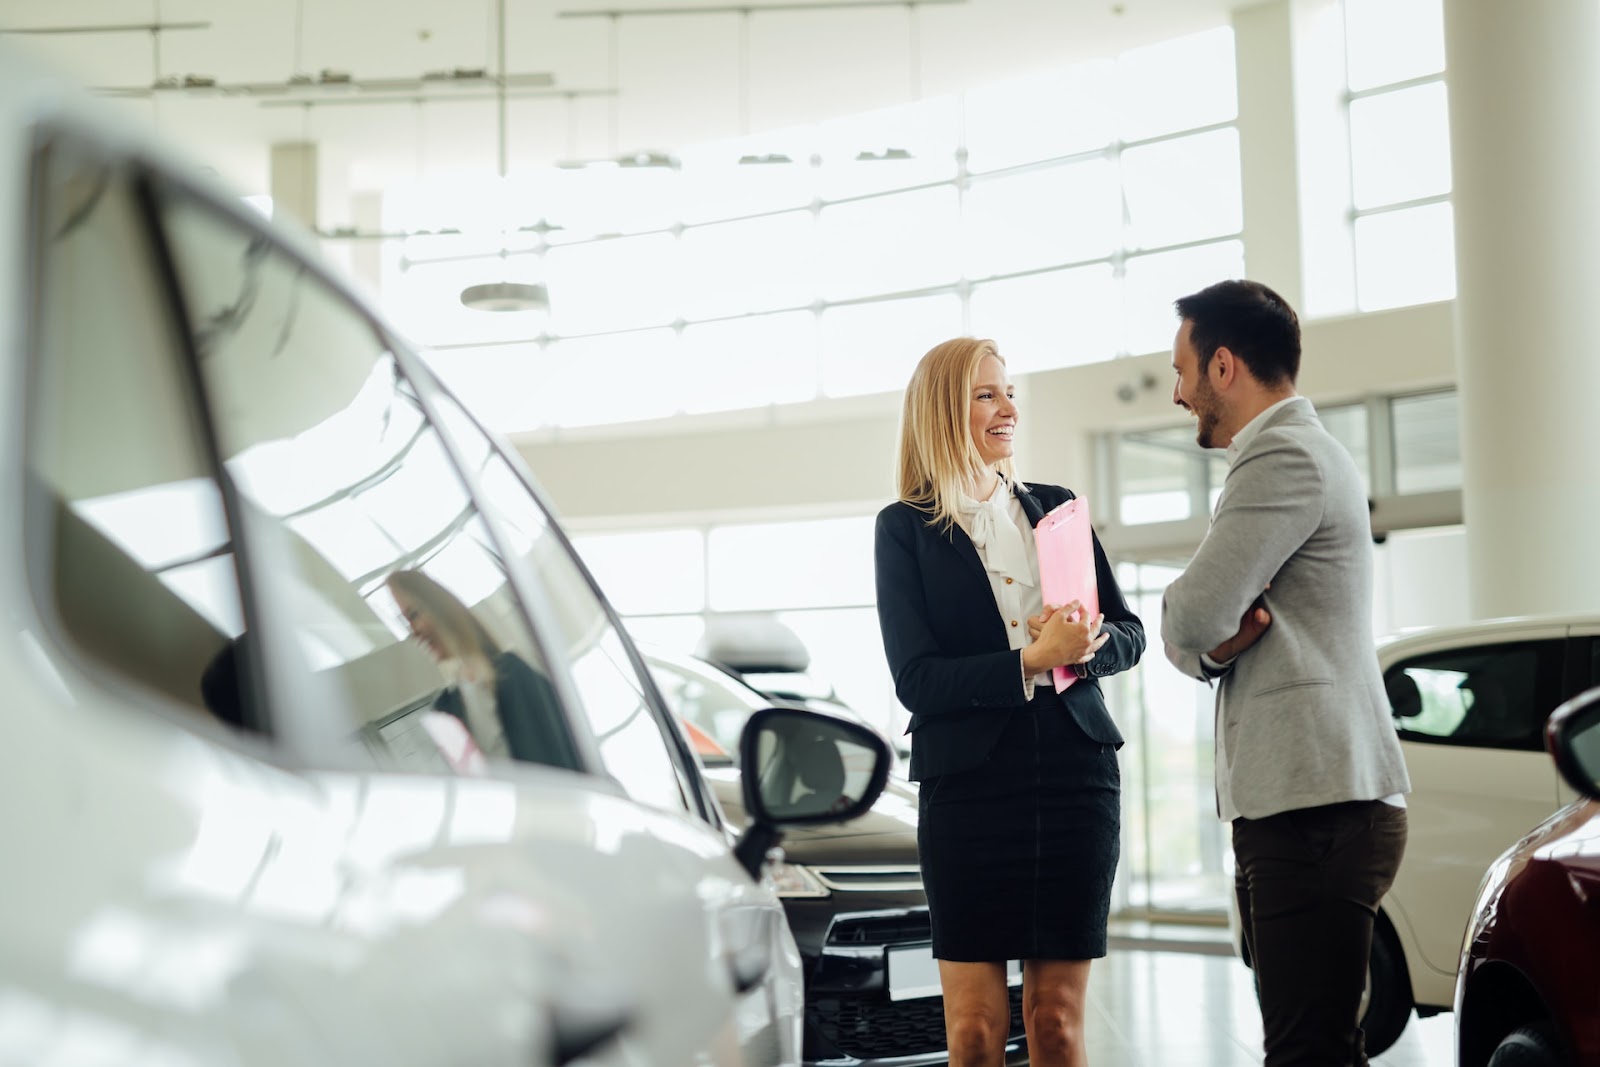 A car salesperson and a man chat in a car showroom